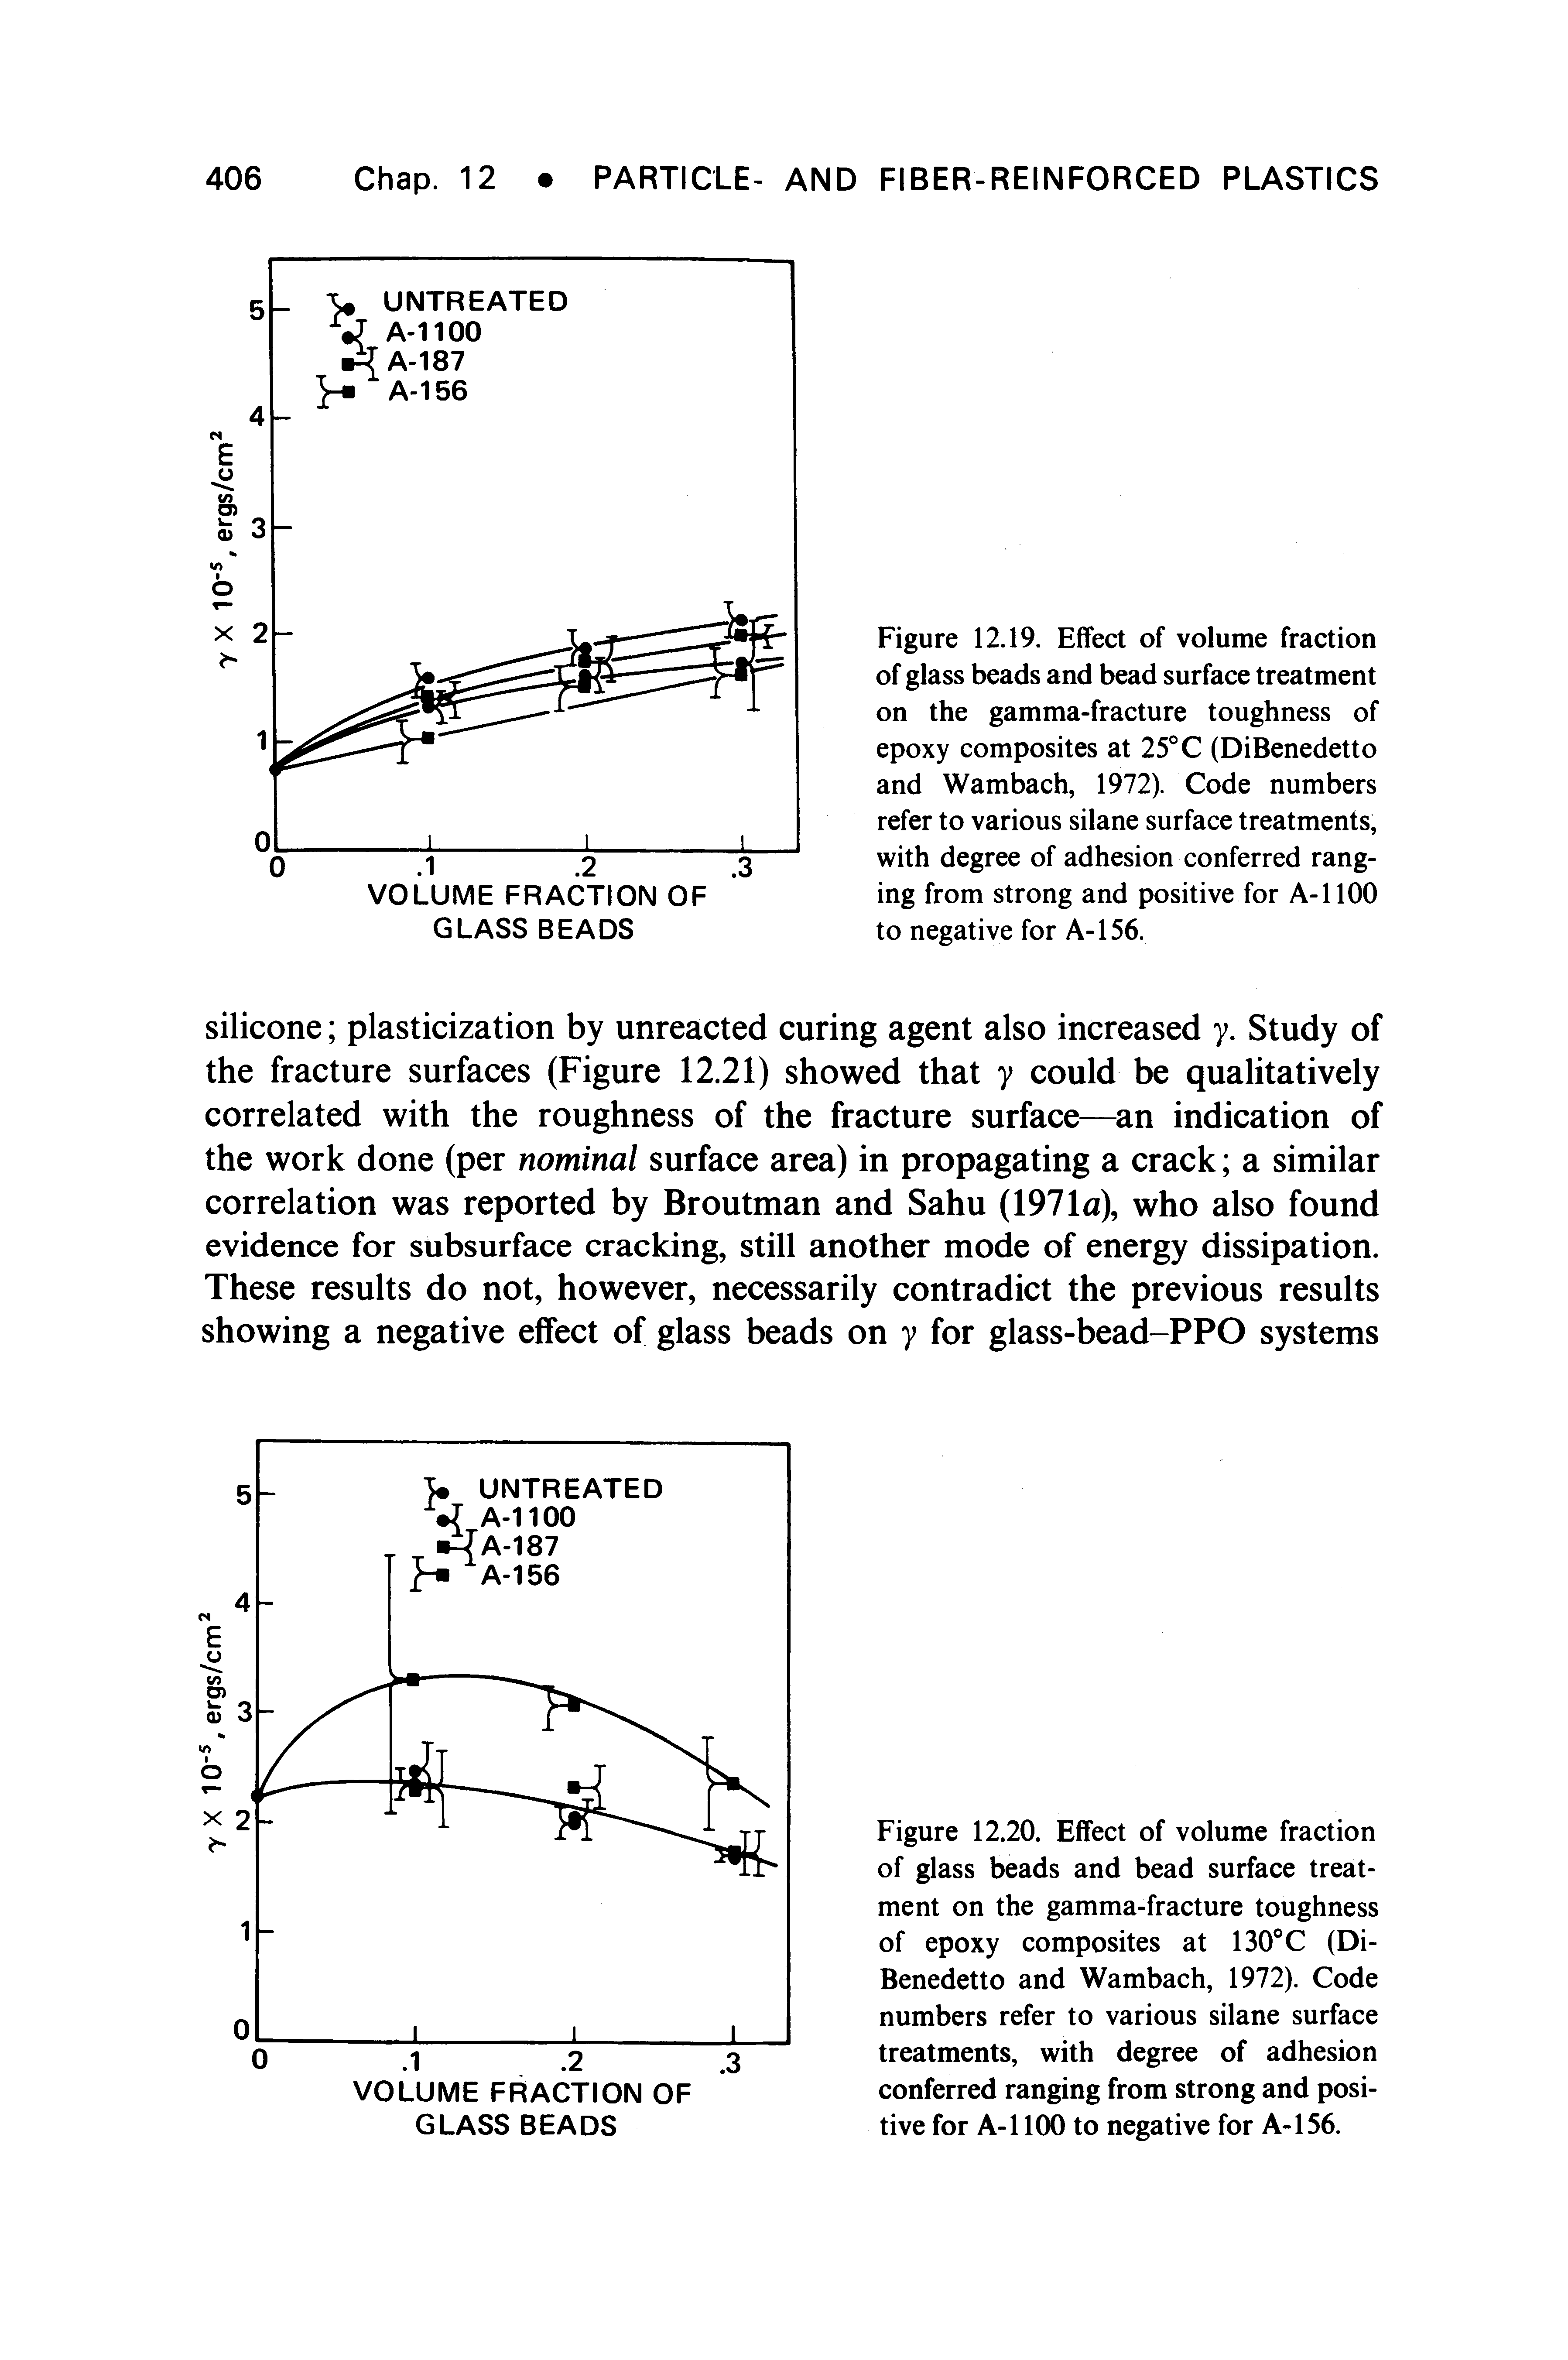 Figure 12.19. Effect of volume fraction of glass beads and bead surface treatment on the gamma-fracture toughness of epoxy composites at 25° C (DiBenedetto and Wambach, 1972). Code numbers refer to various silane surface treatments, with degree of adhesion conferred ranging from strong and positive for A-1100 to negative for A-156.